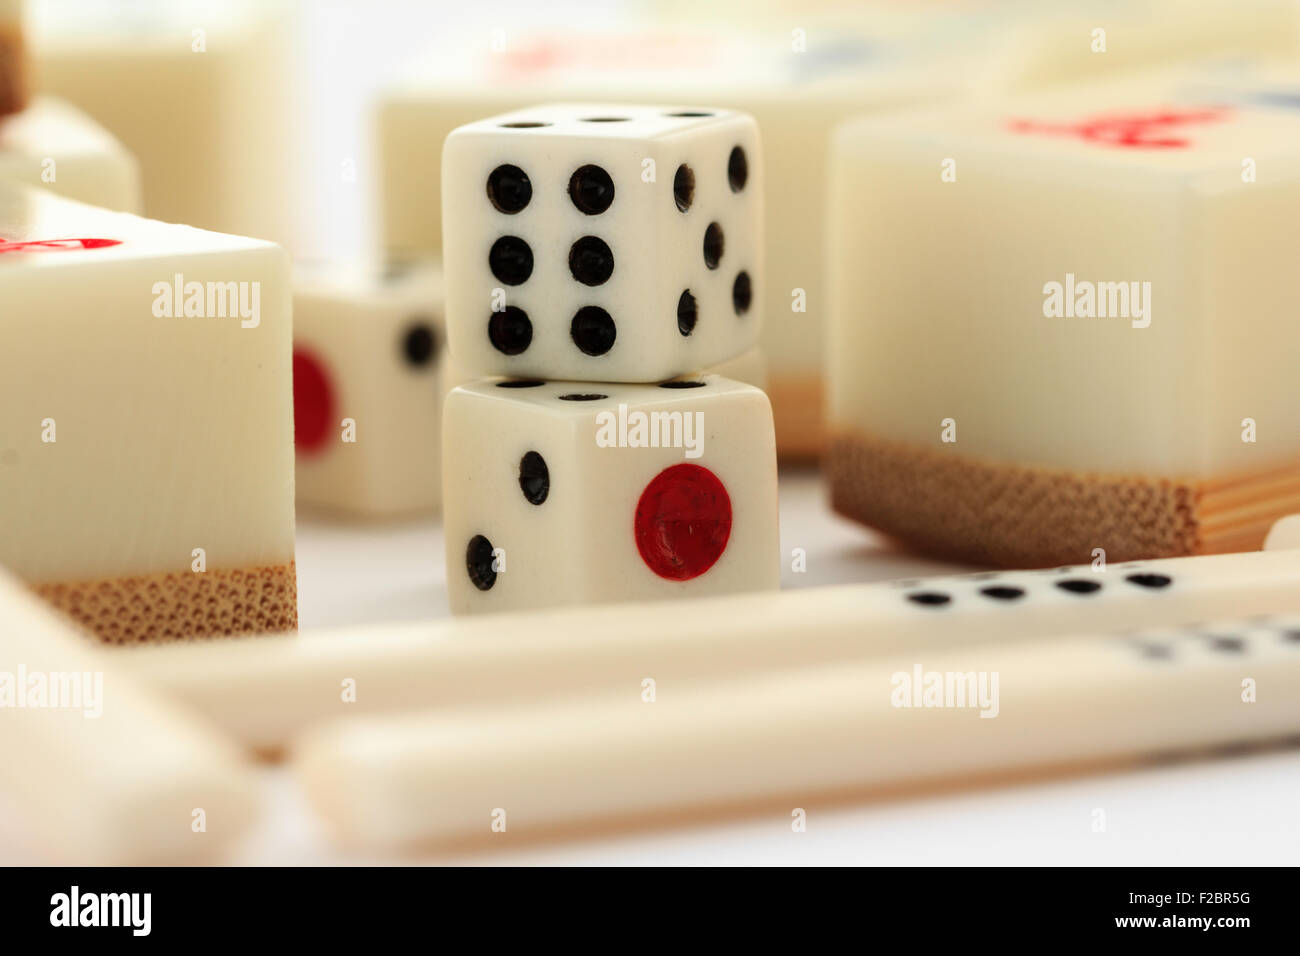 Mahjong, Mah jong gambling set. Various cards or tiles, dice and some counters laying on plain white background. Stock Photo